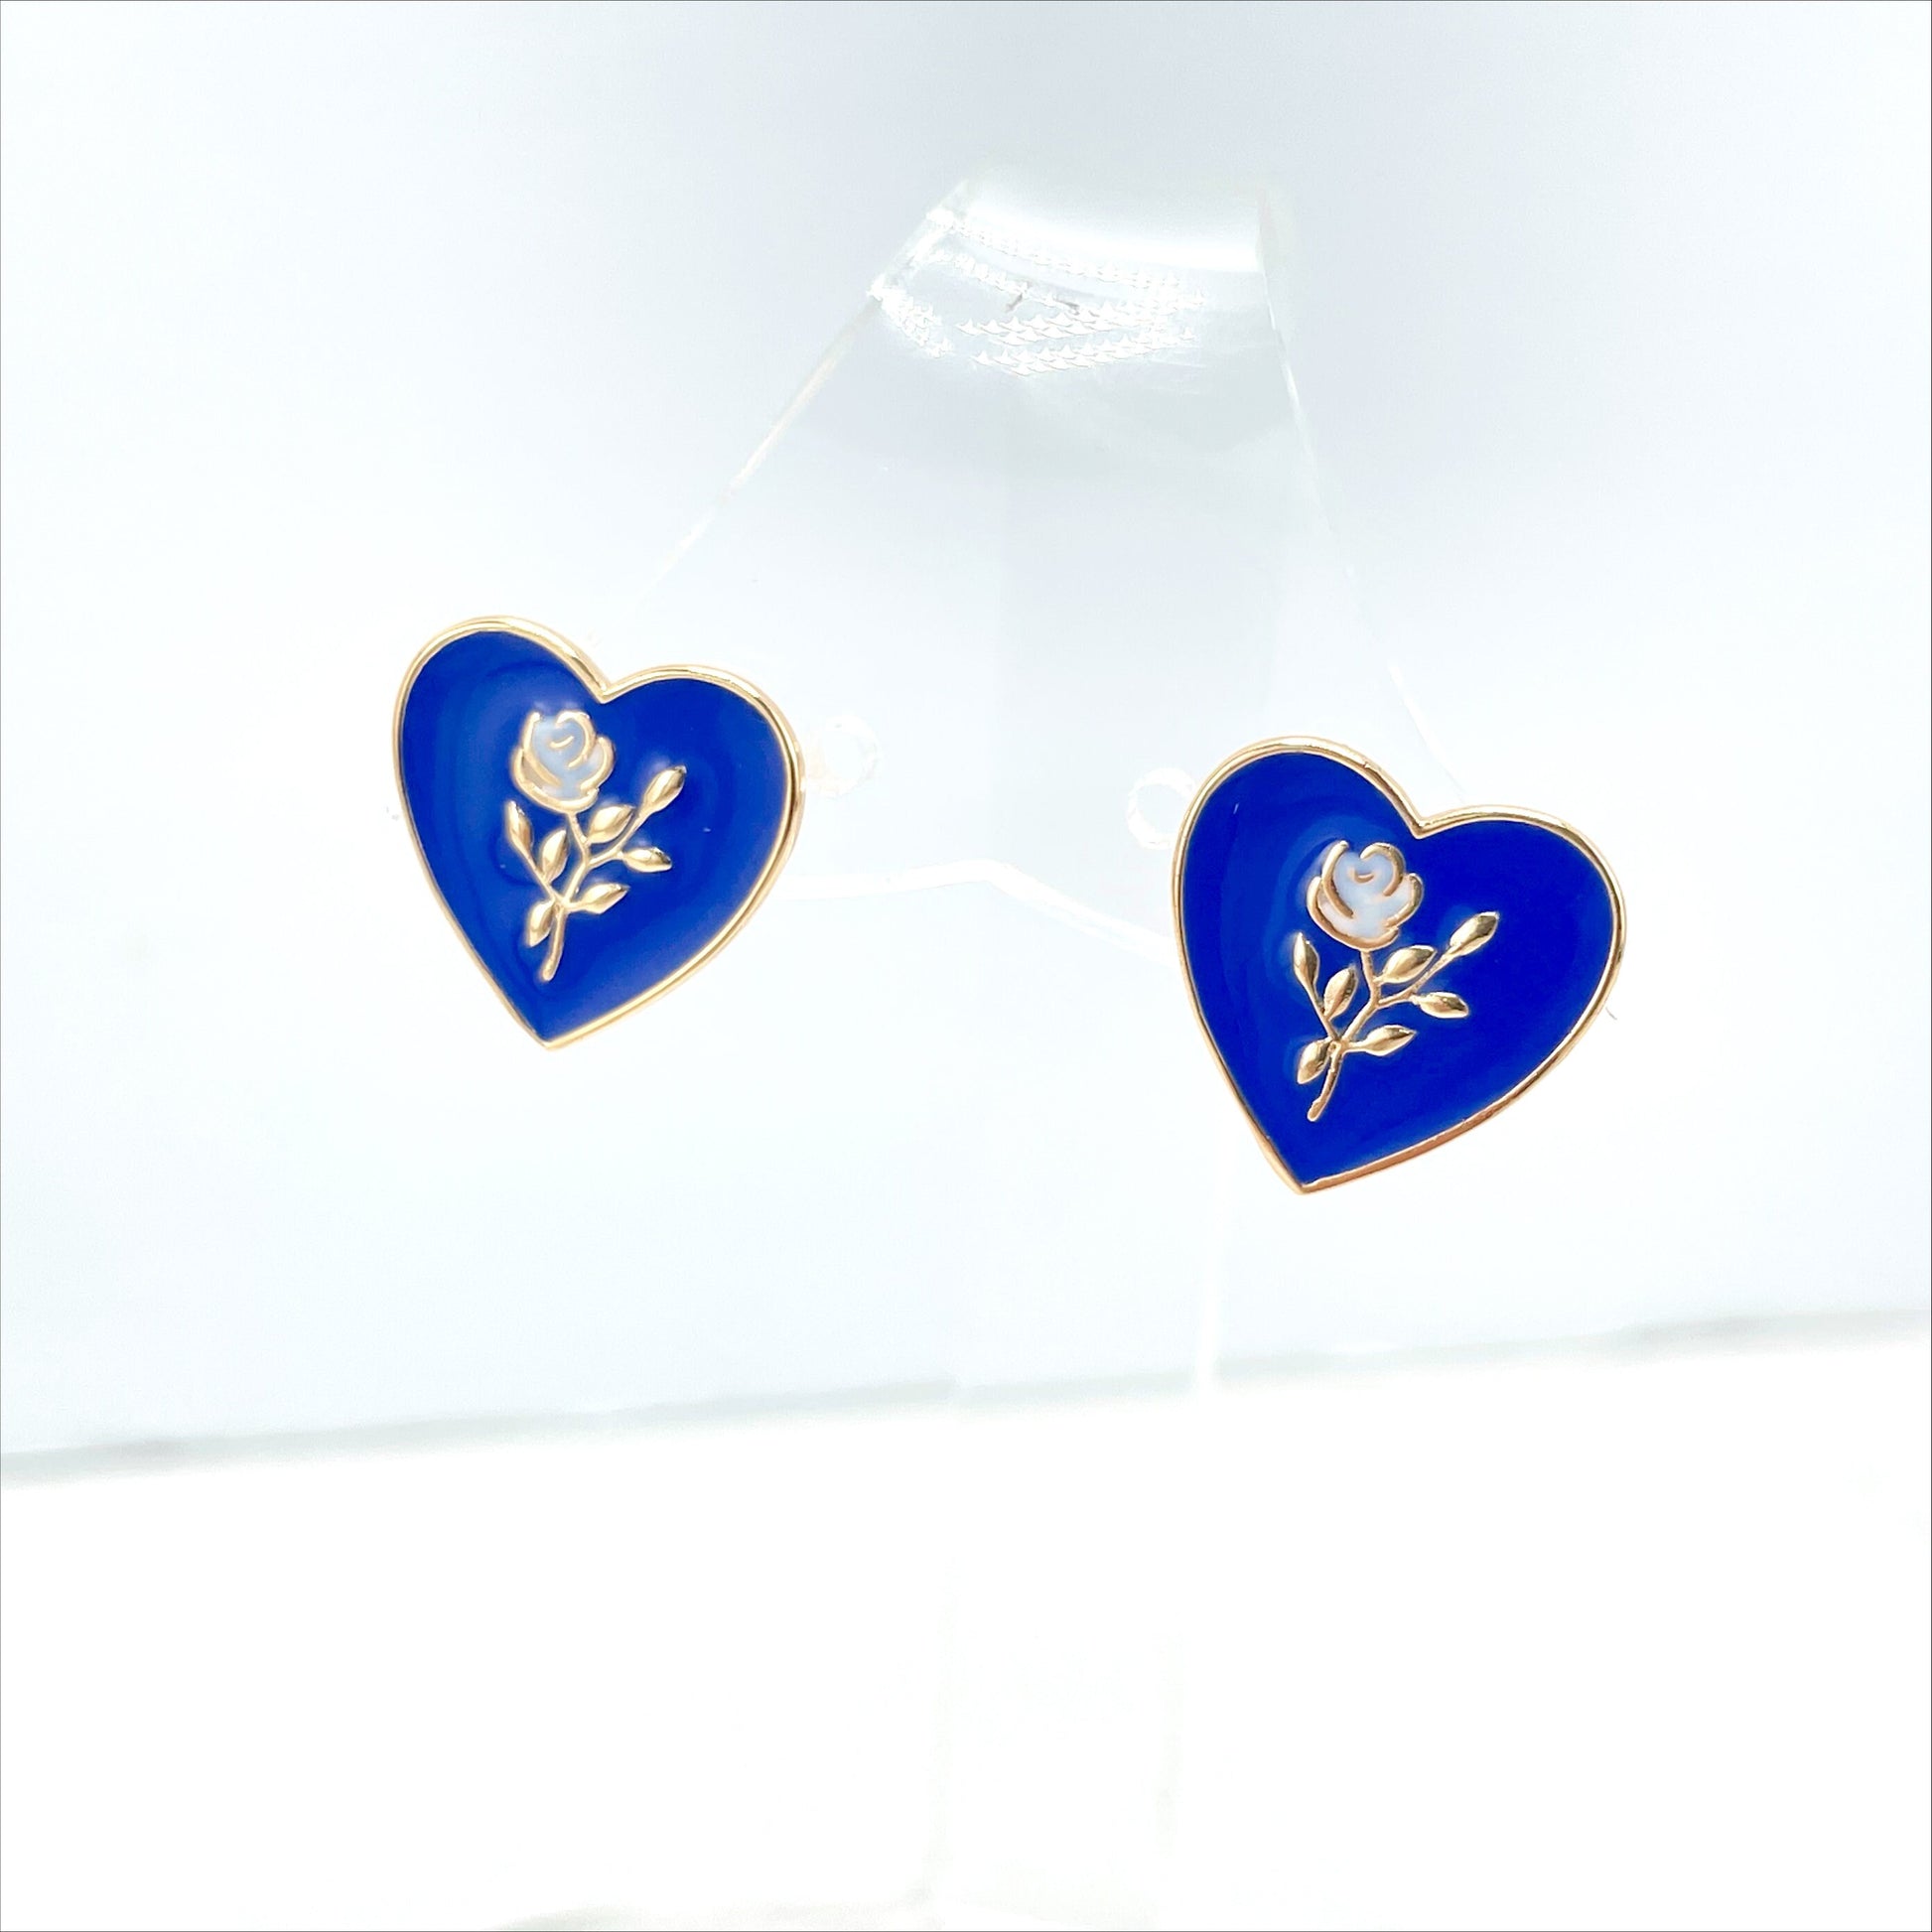 18k Gold Filled Colored Enamel with Rose Inside in Heart Shape Earrings, White, Blue, Green, Red or Black Option, Wholesale Jewelry Supplies